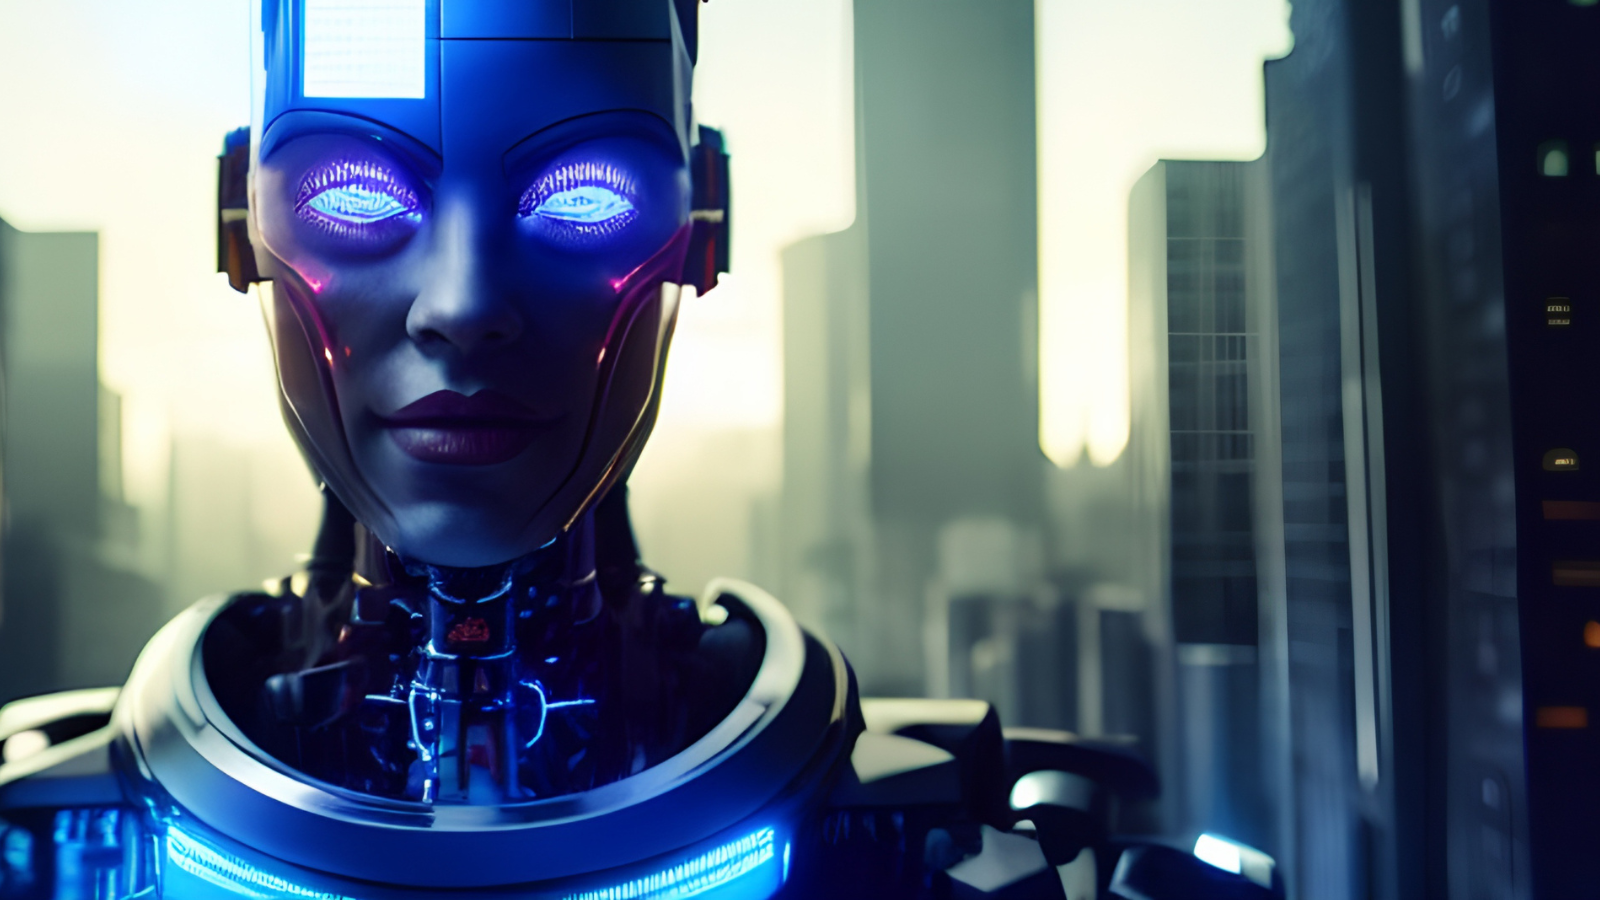 A part woman, part-robot appearing woman is forefront with the sun rising over a city with skyscrapers in the background.